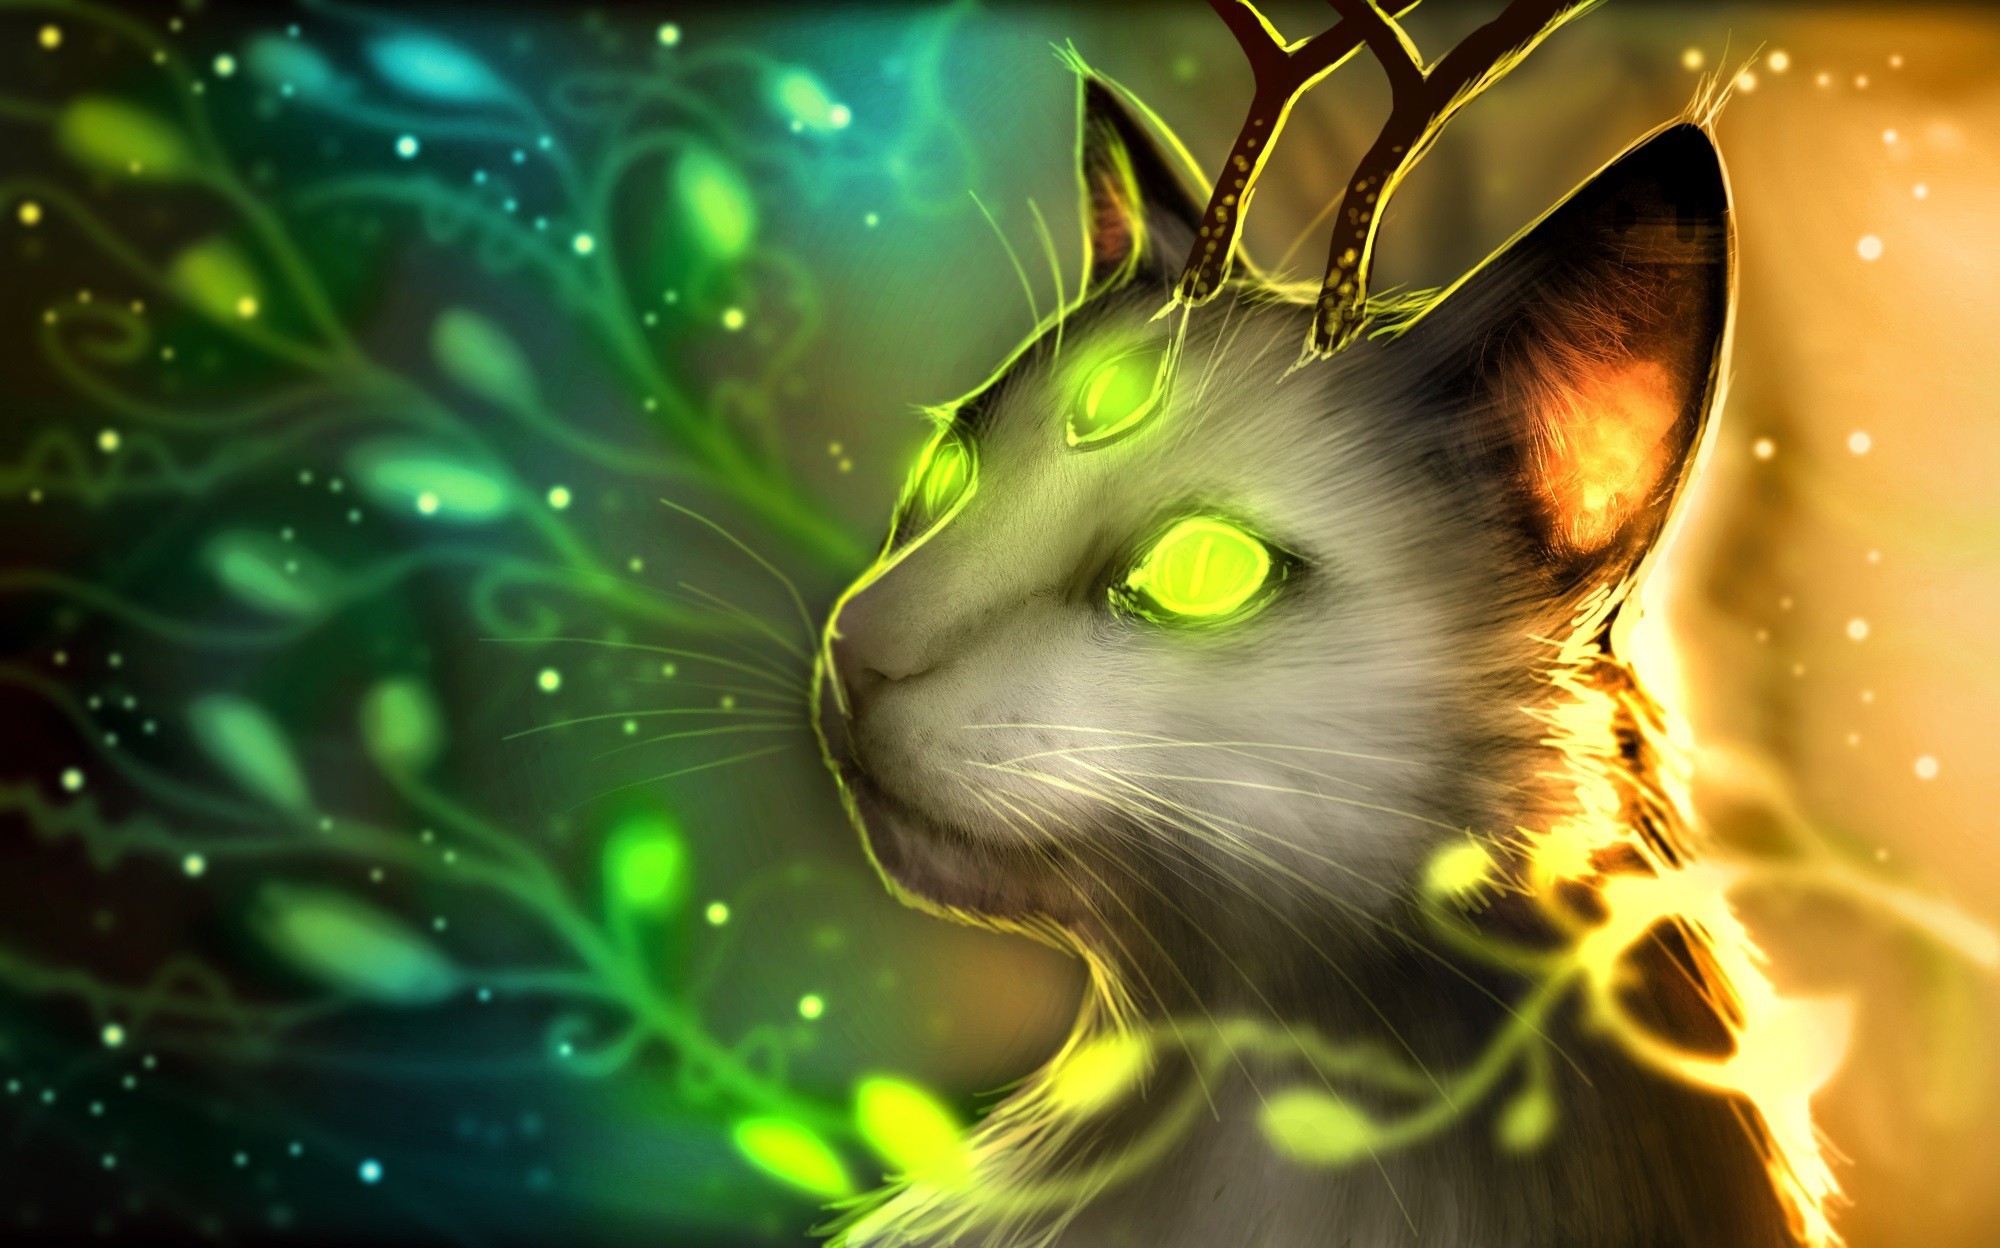 fantasy Art, Romantically Apocalyptic, Cat, Antlers, Glowing, Green Eyes Wallpaper